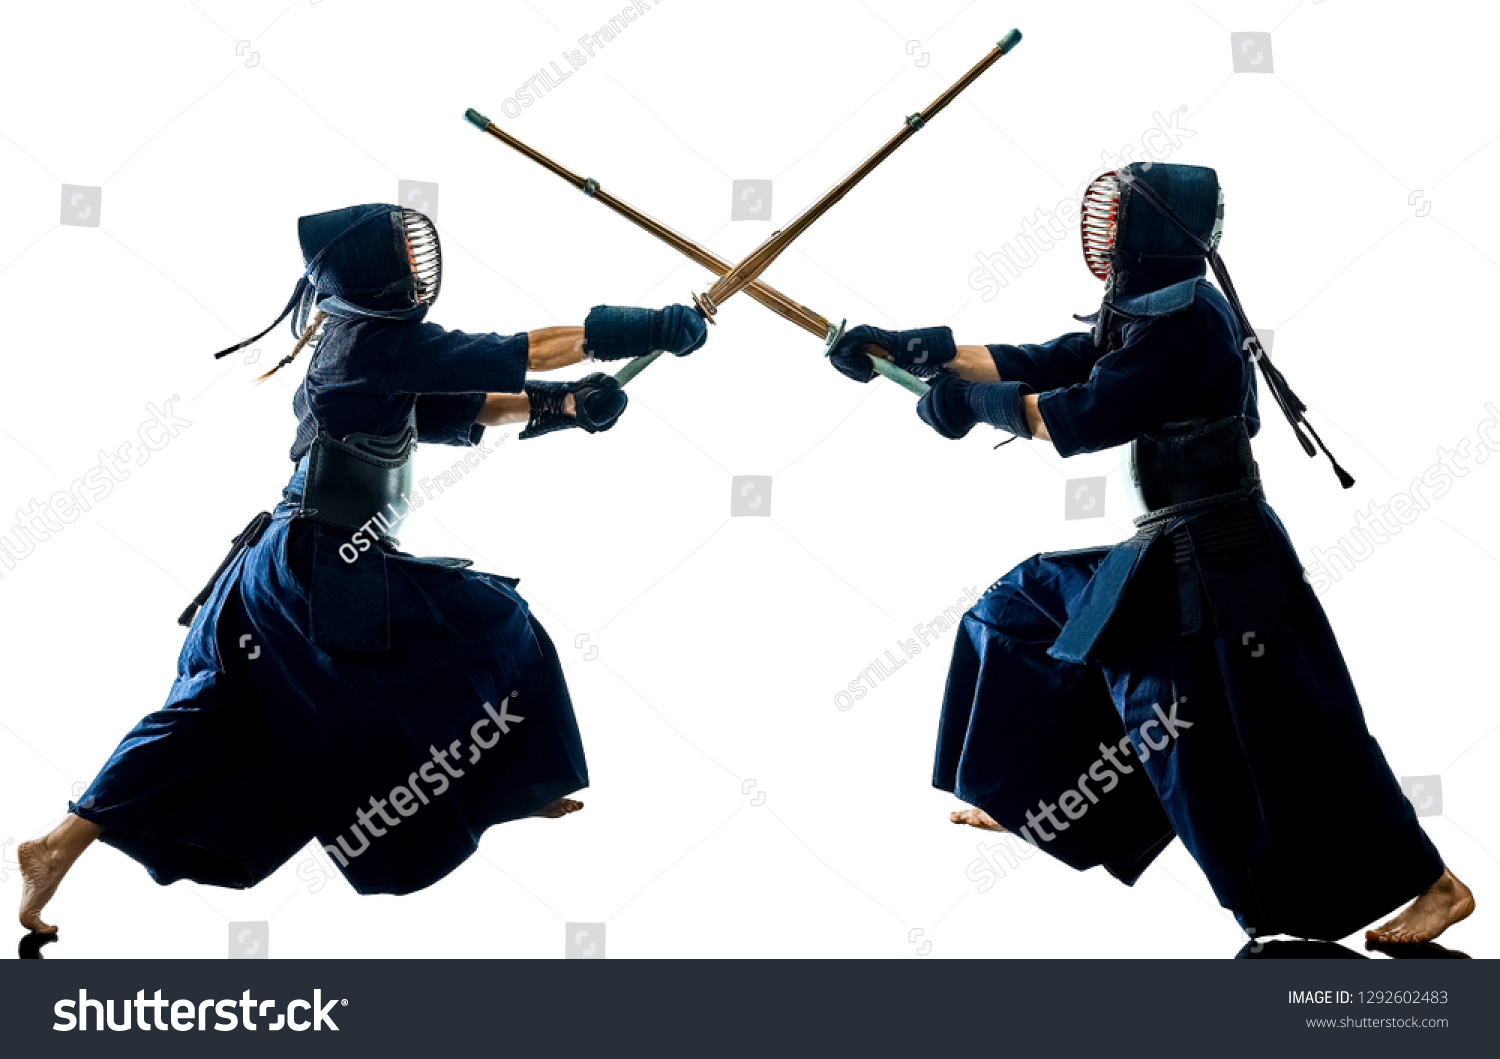 two Kendo martial arts fighters combat fighting in silhouette isolated on white bacground #1292602483